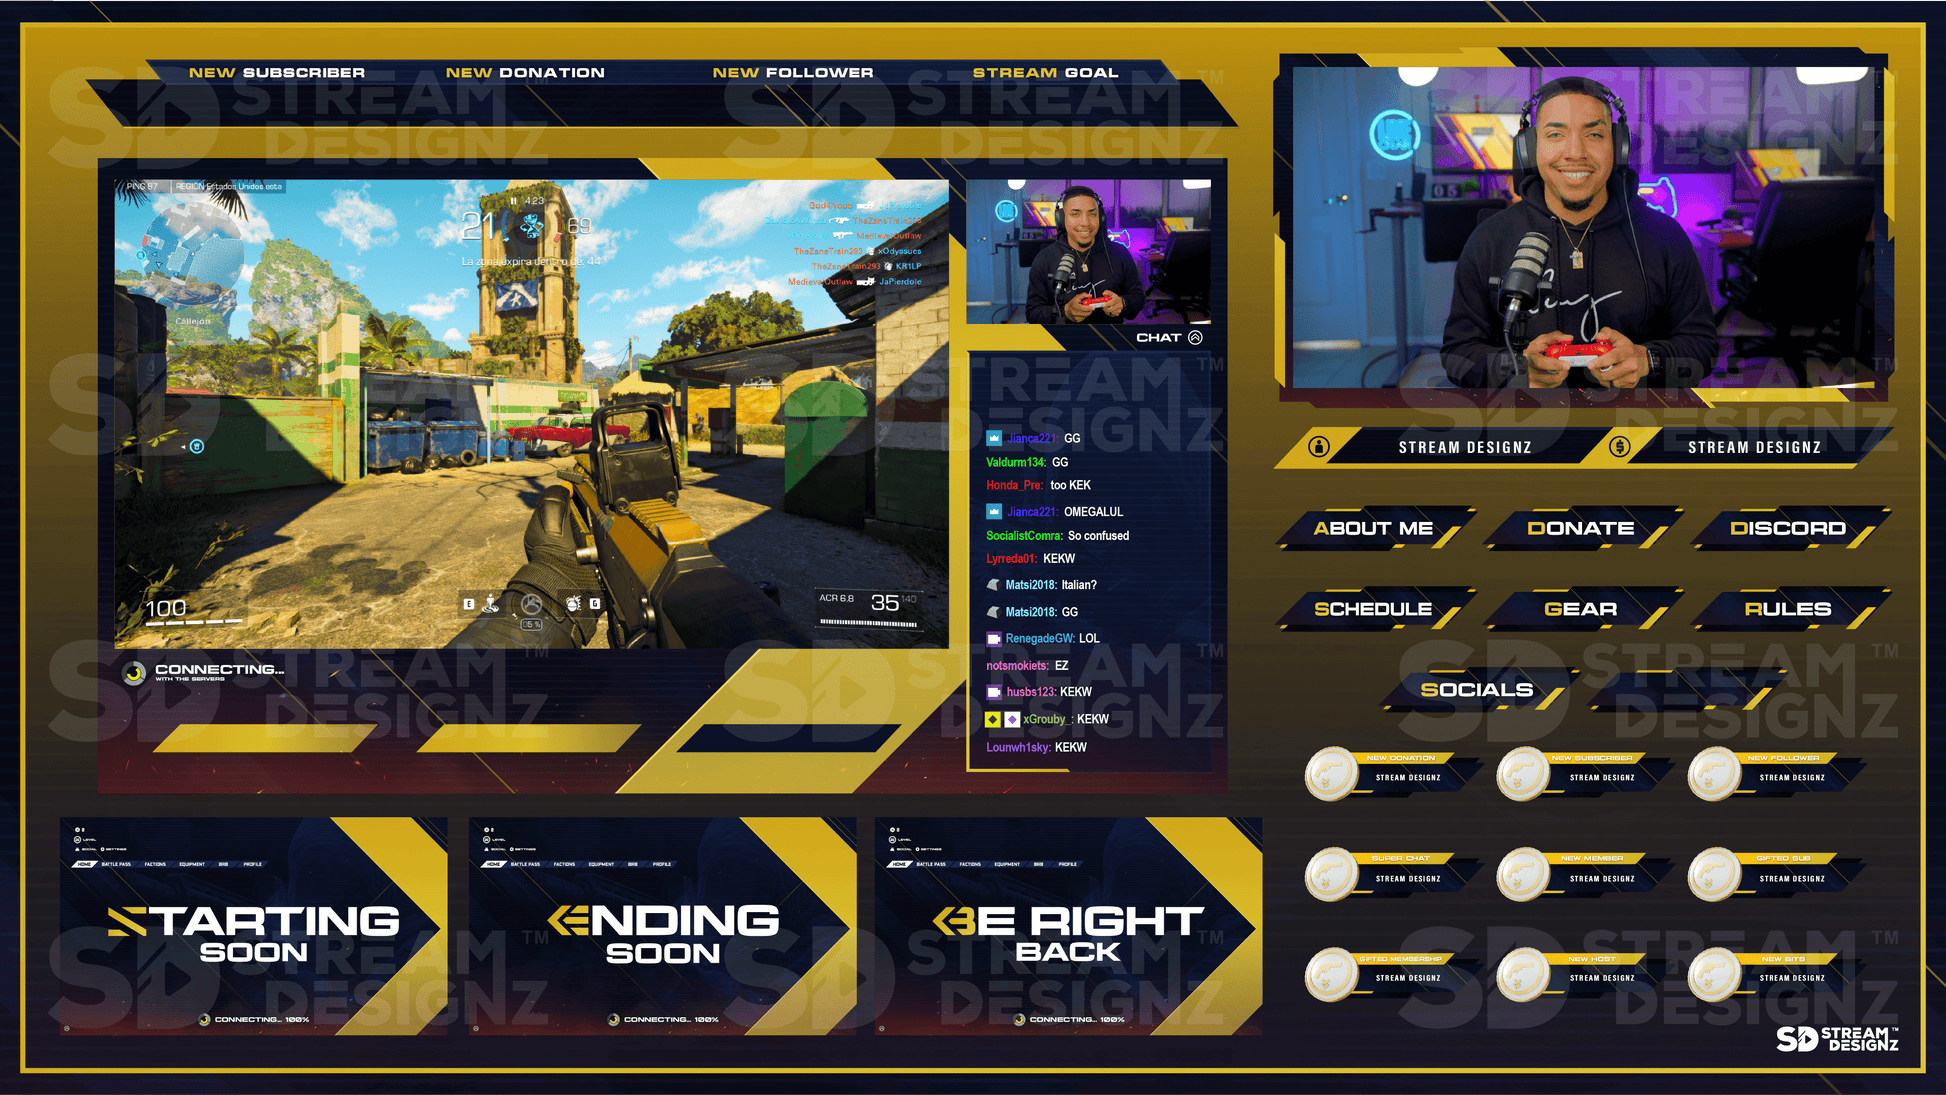 the ultimate stream package feature image defiance stream designz